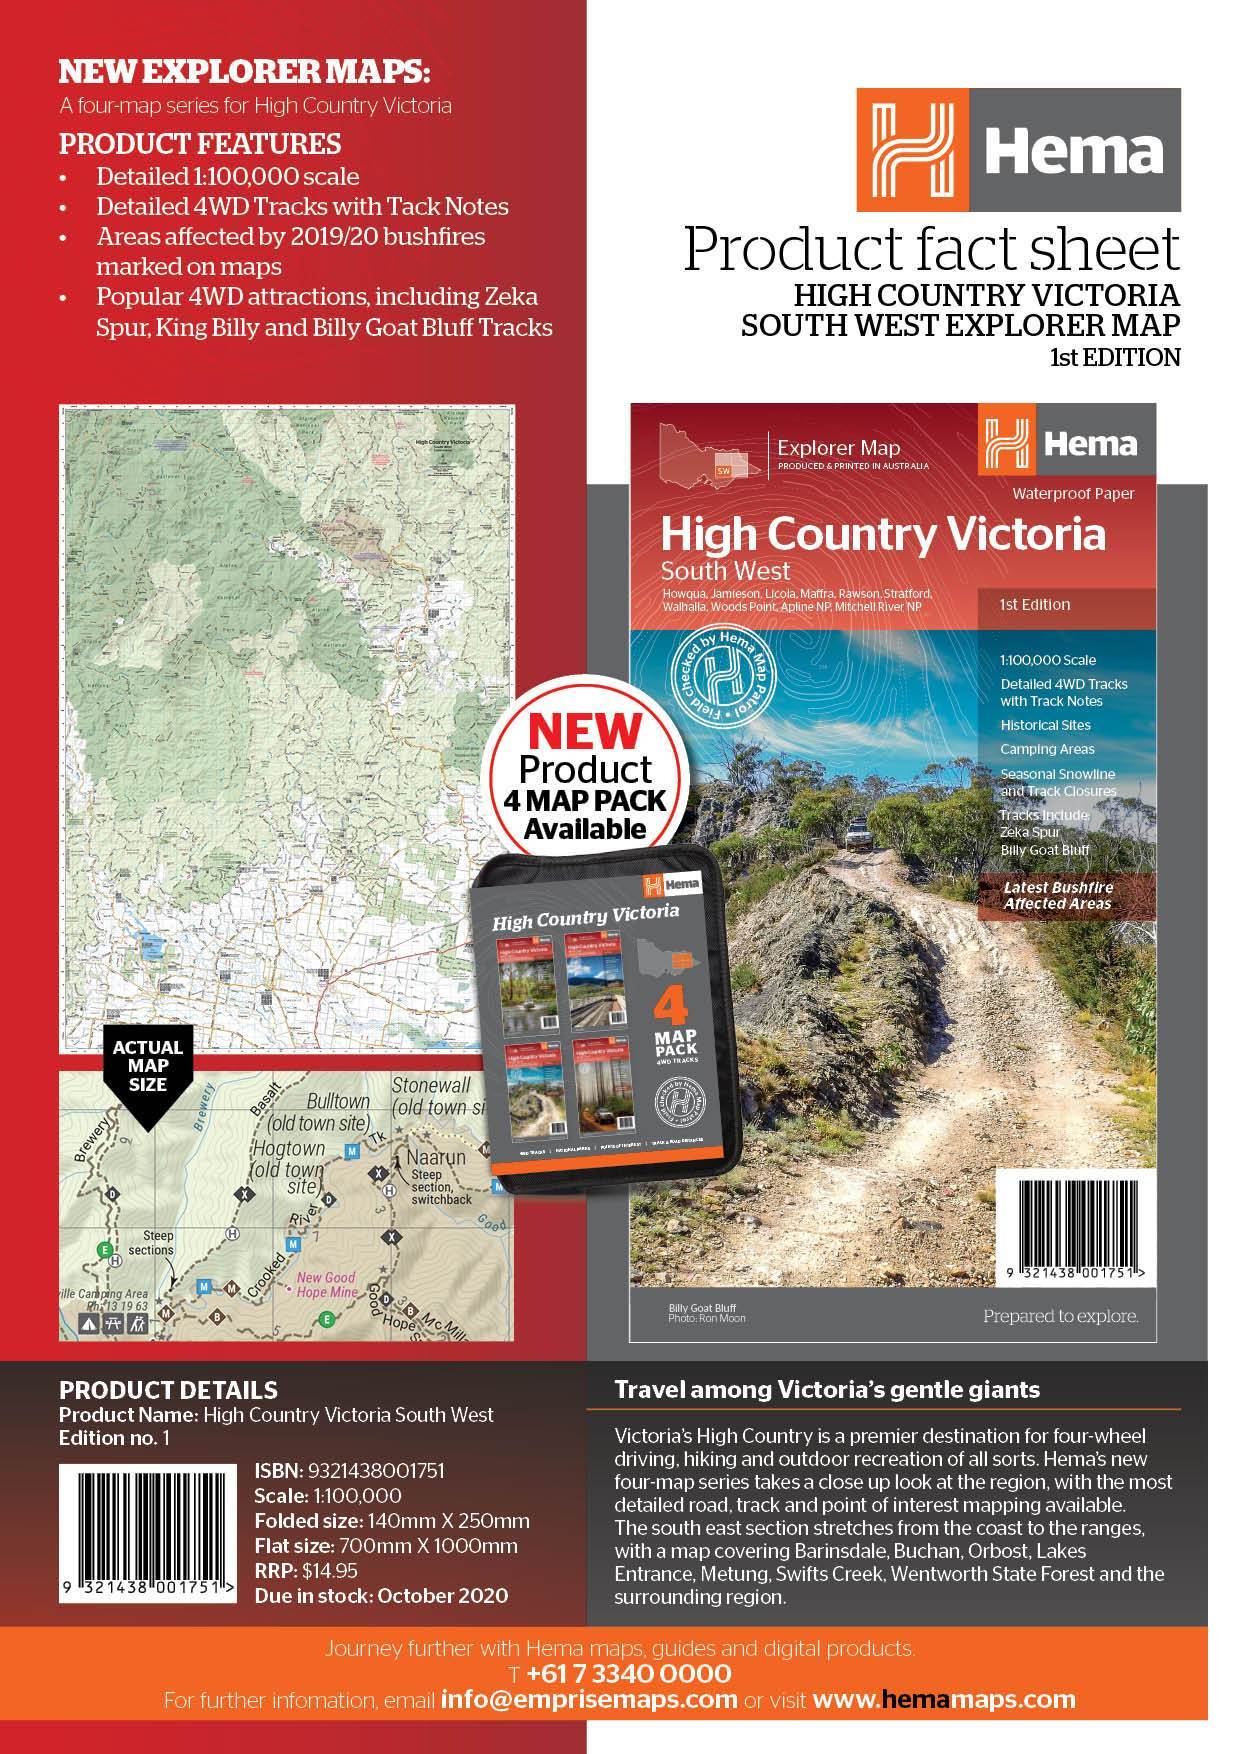 Hema The Victorian High Country - South Western Map 1st Edition | Hema